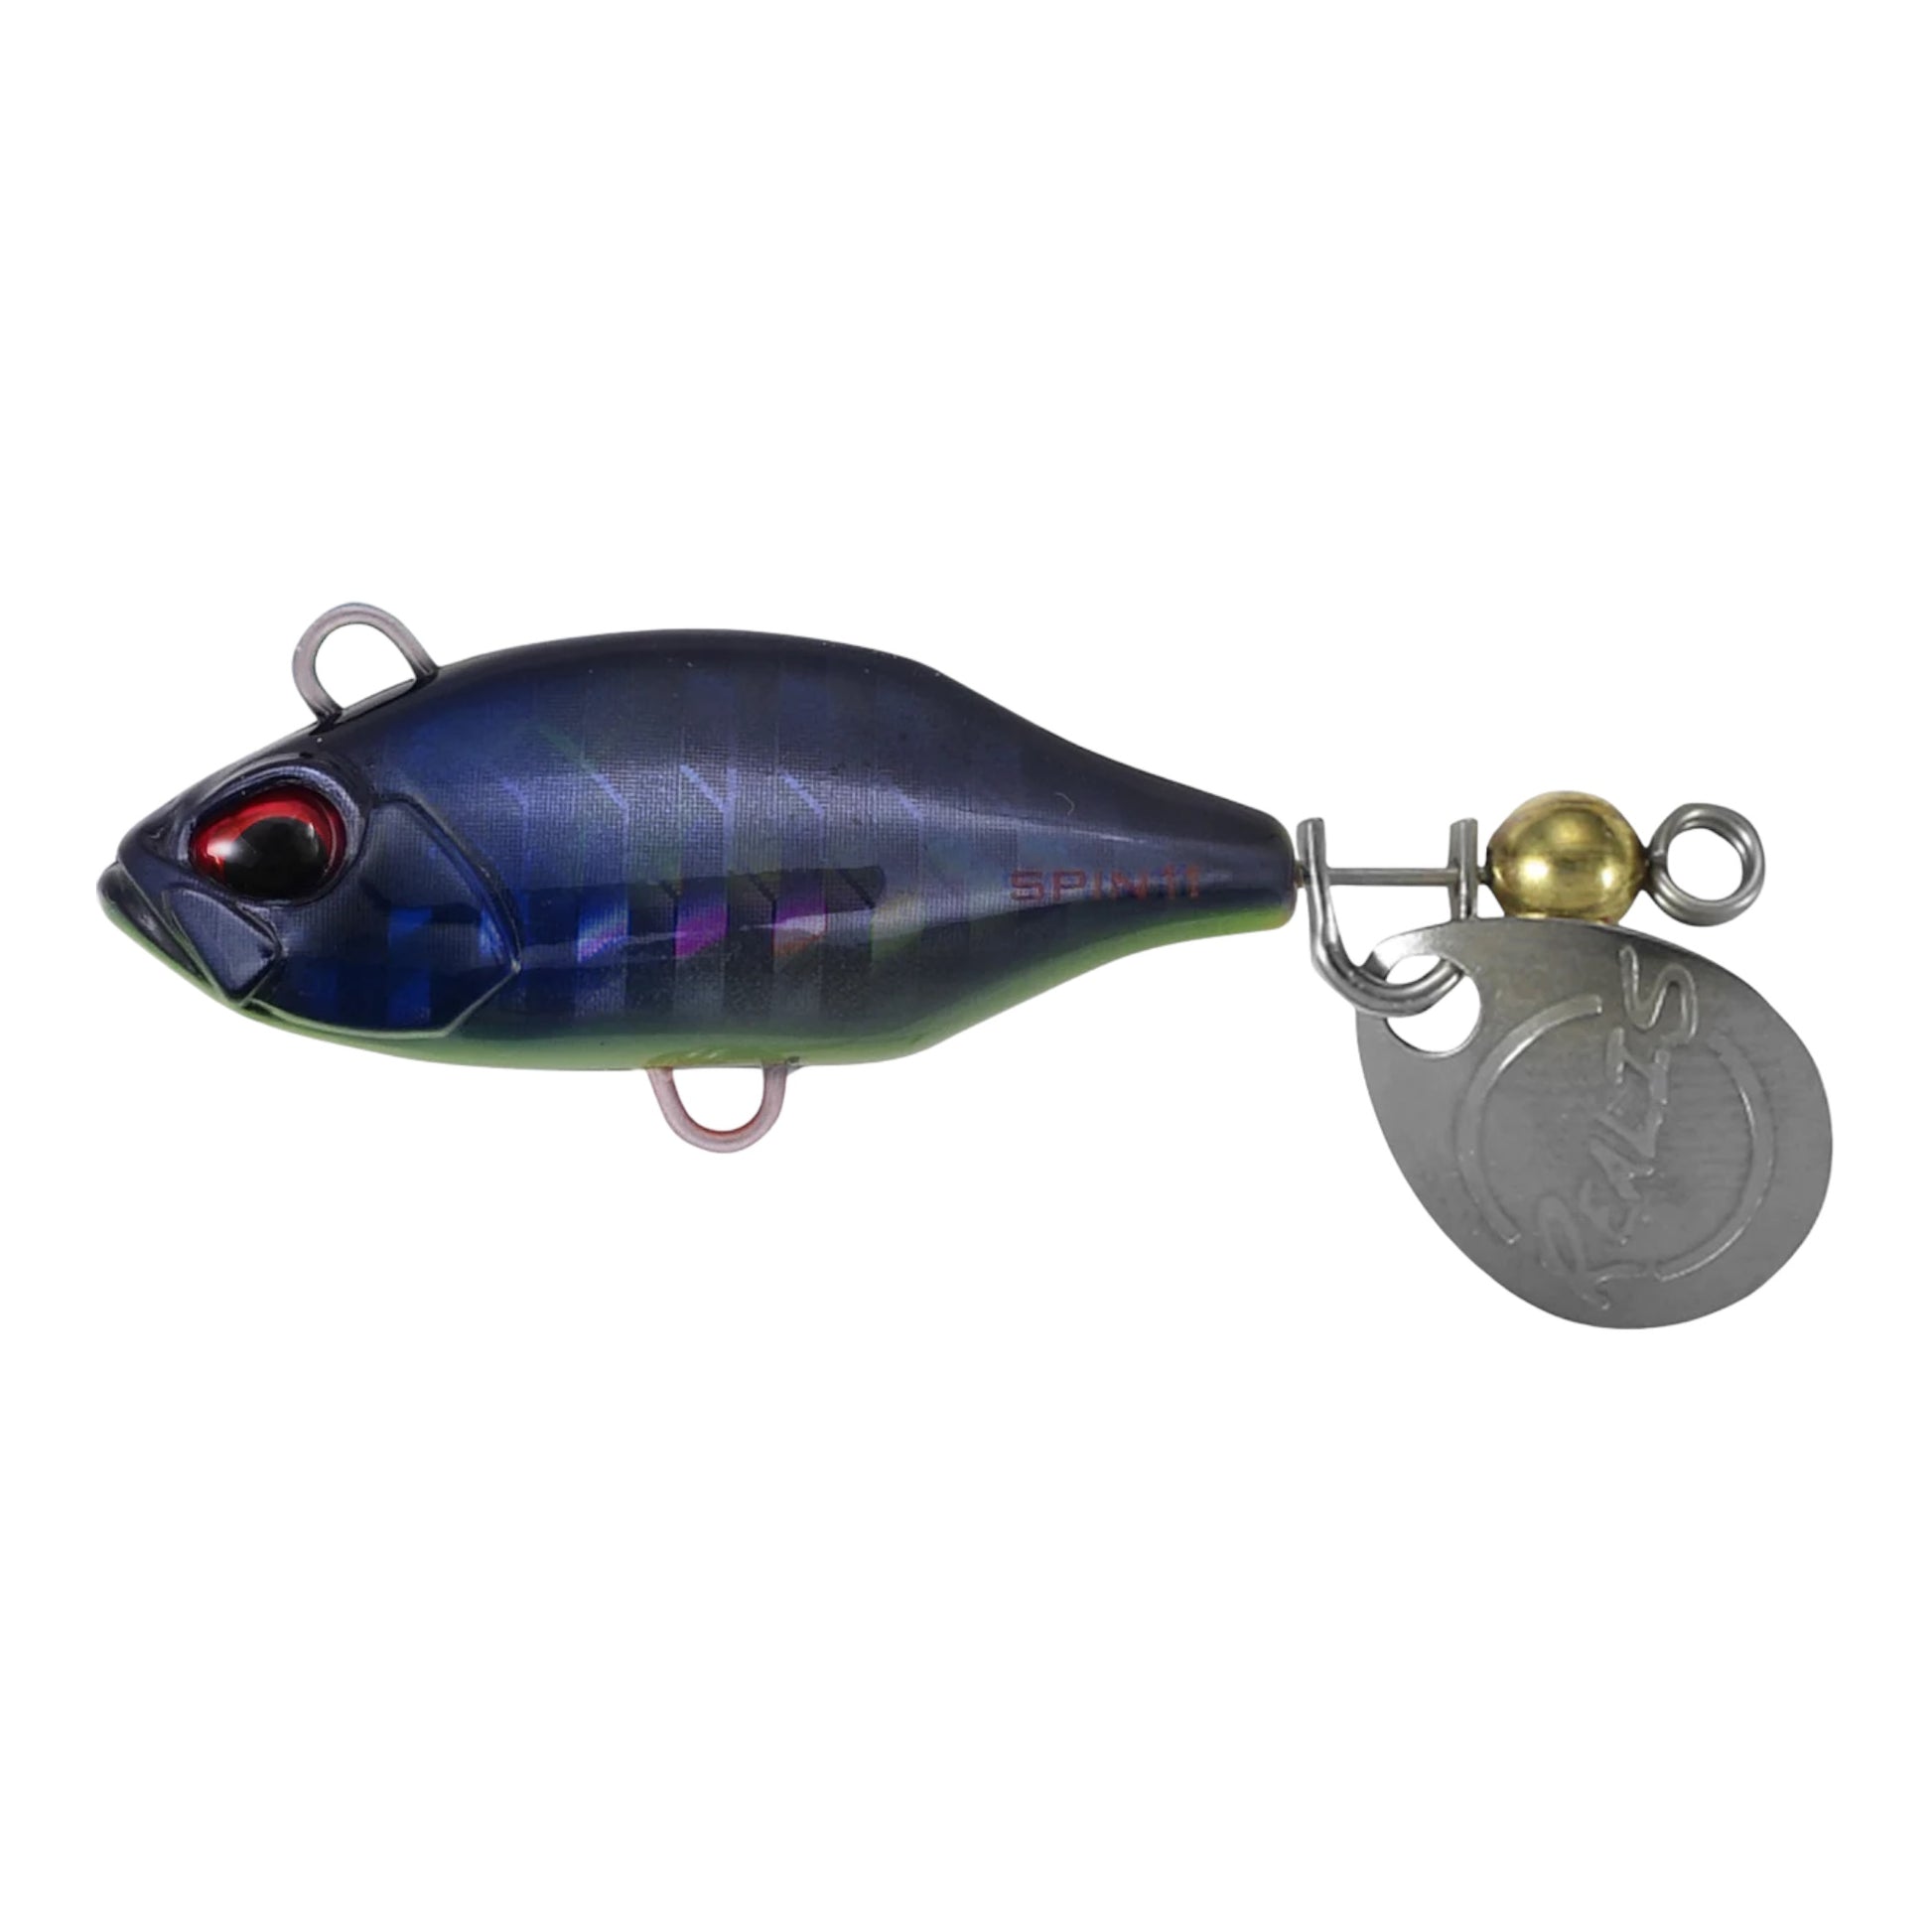 DUO Realis Spin Tail Spin Lure – Three Rivers Tackle